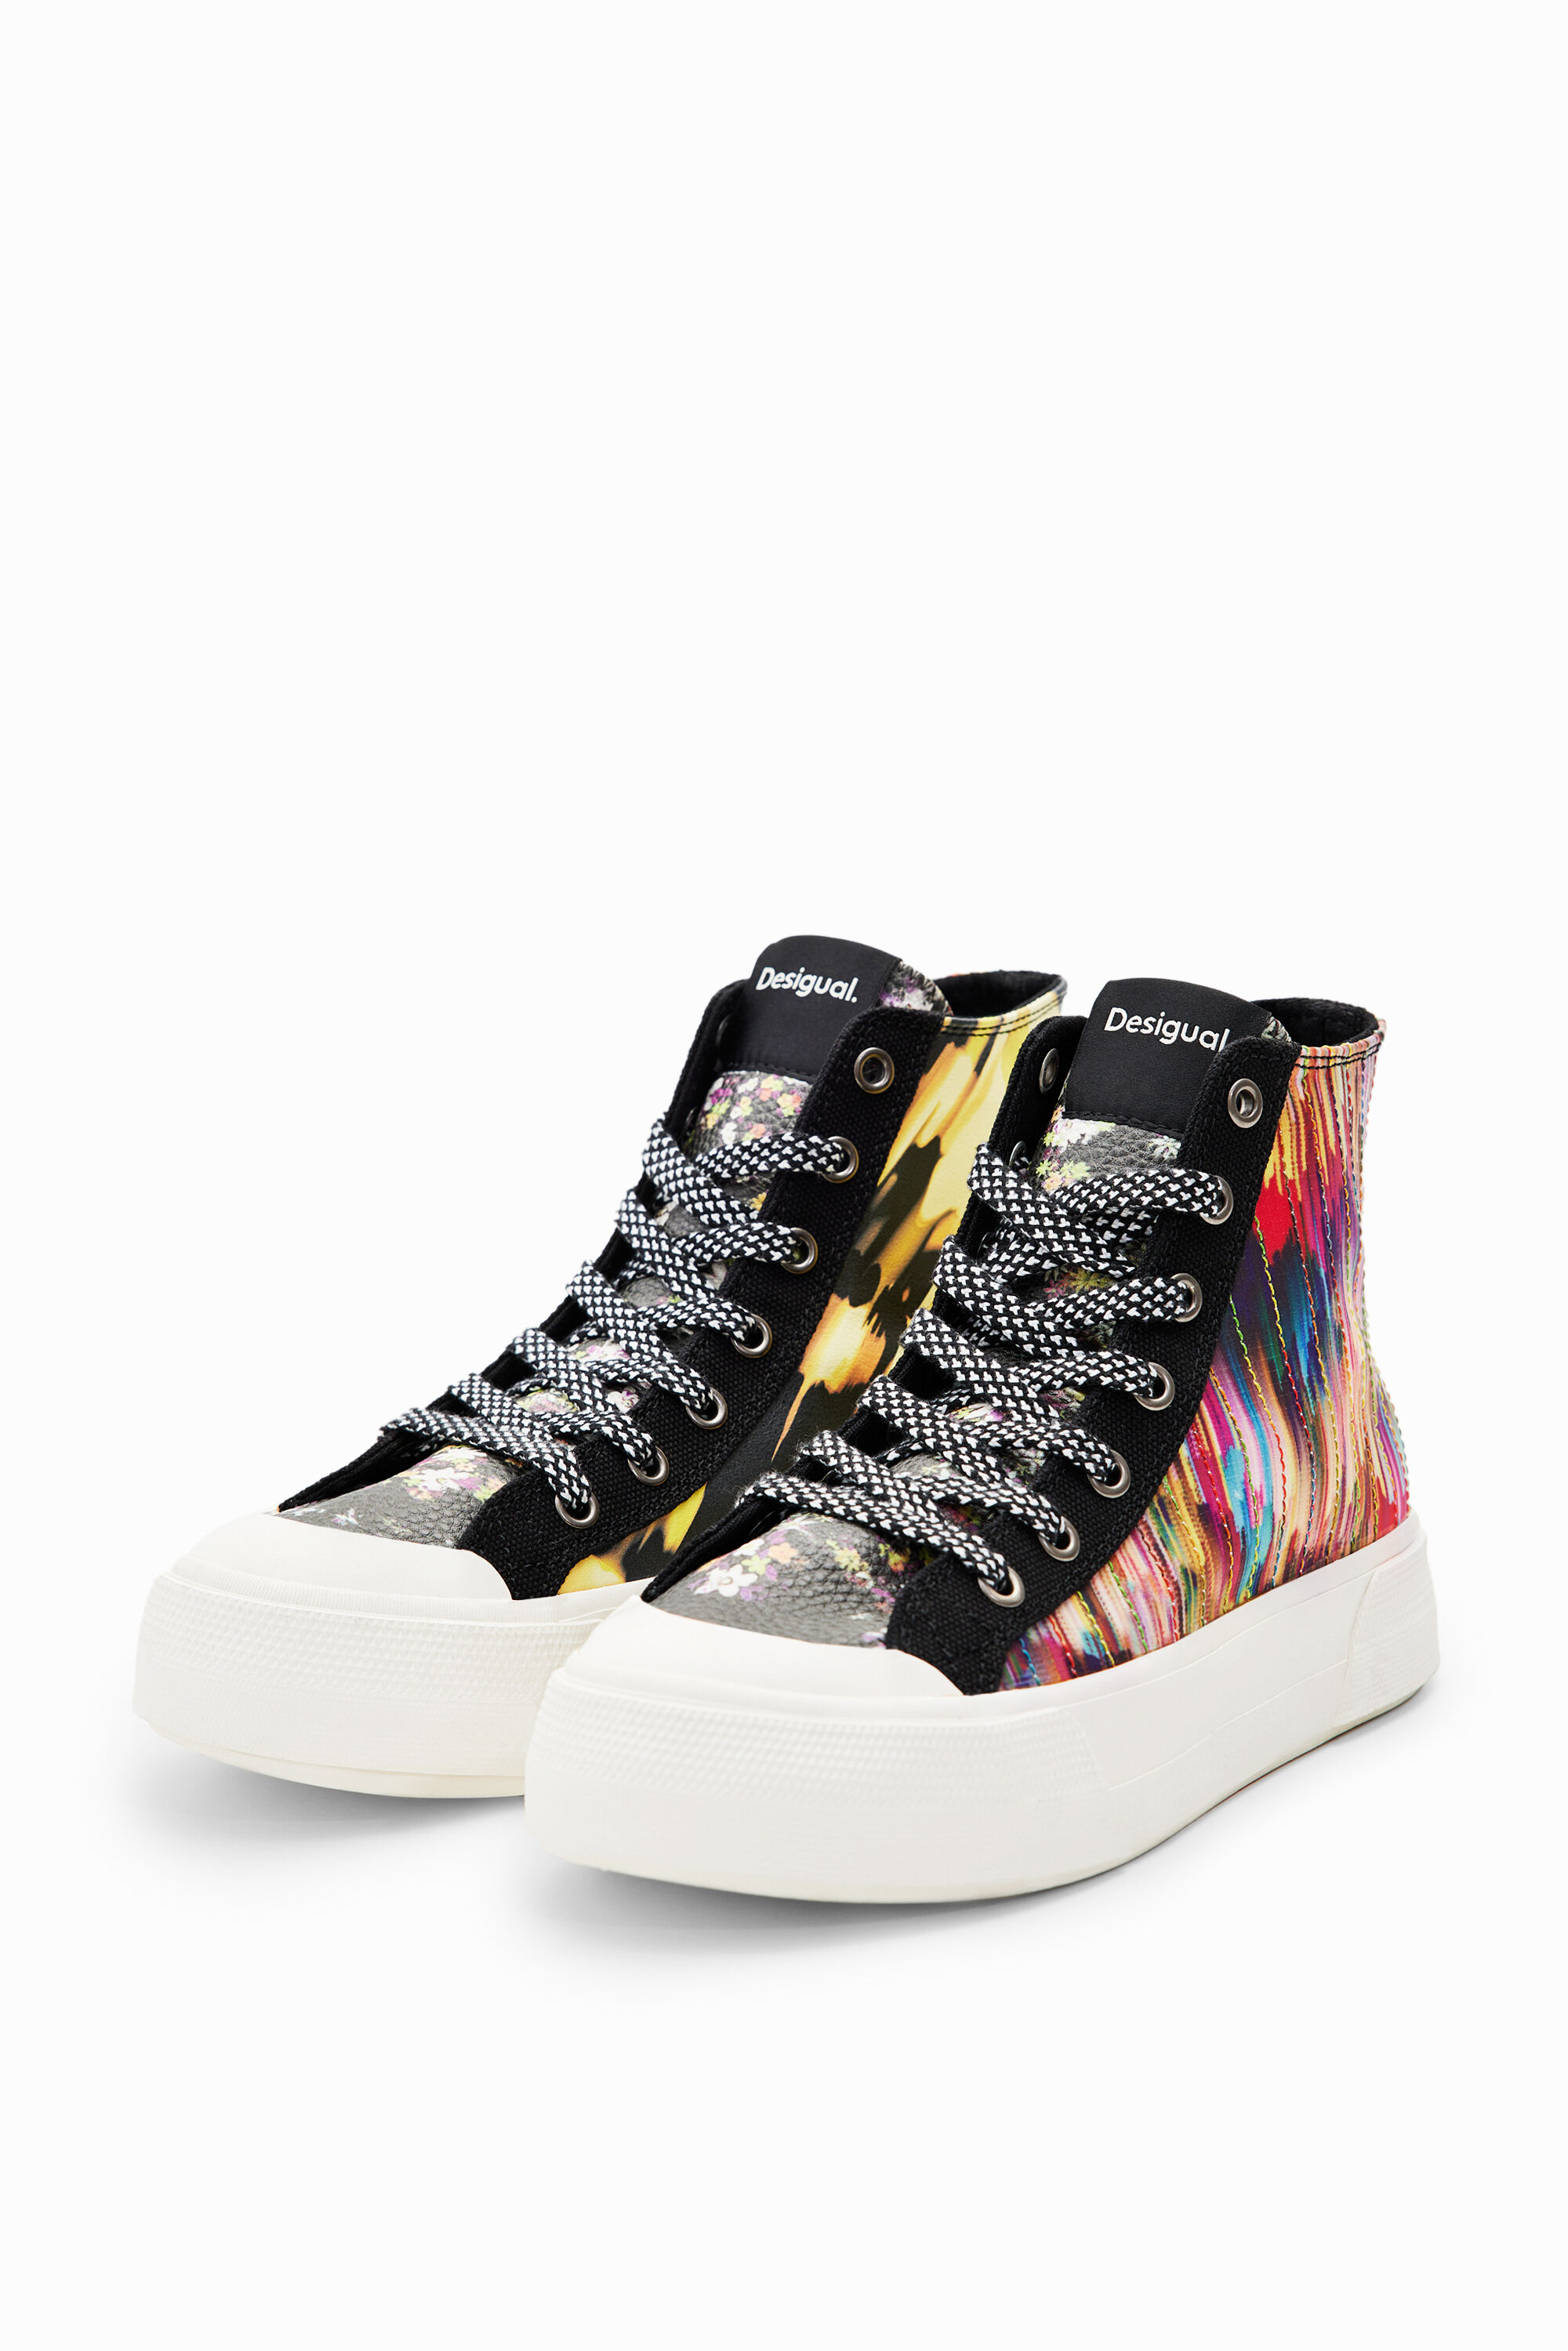 High-top glitch patchwork sneakers - MATERIAL FINISHES - 39